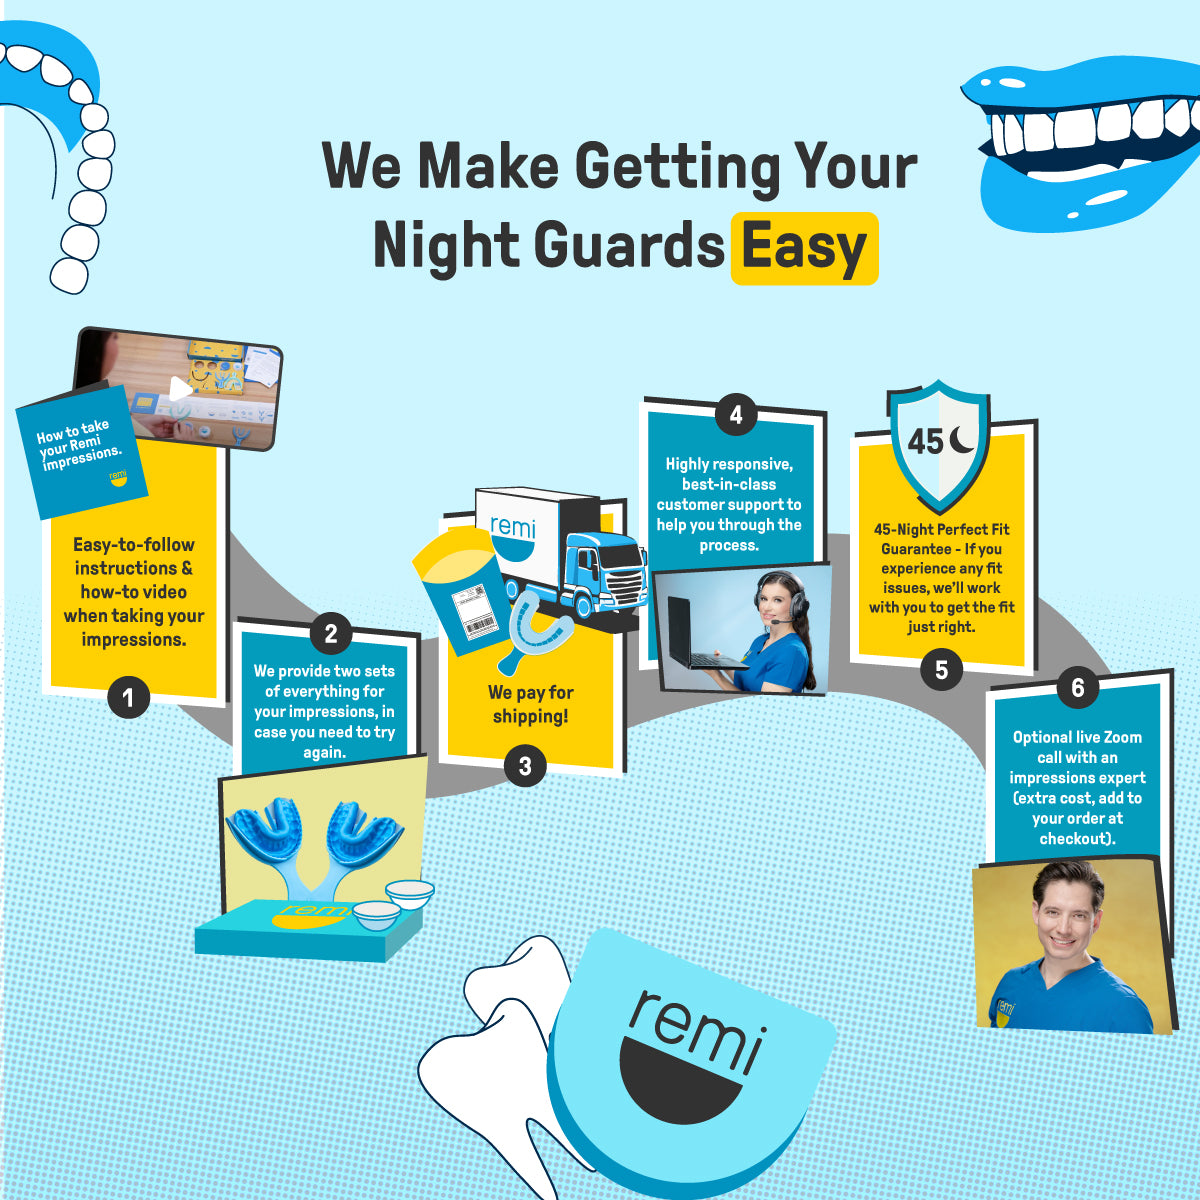 Infographic explaining steps to obtain Custom Night Guards from Remi, highlighting ease of use, dental-grade quality, free shipping, 45-night guarantee, and support options for teeth grinding.